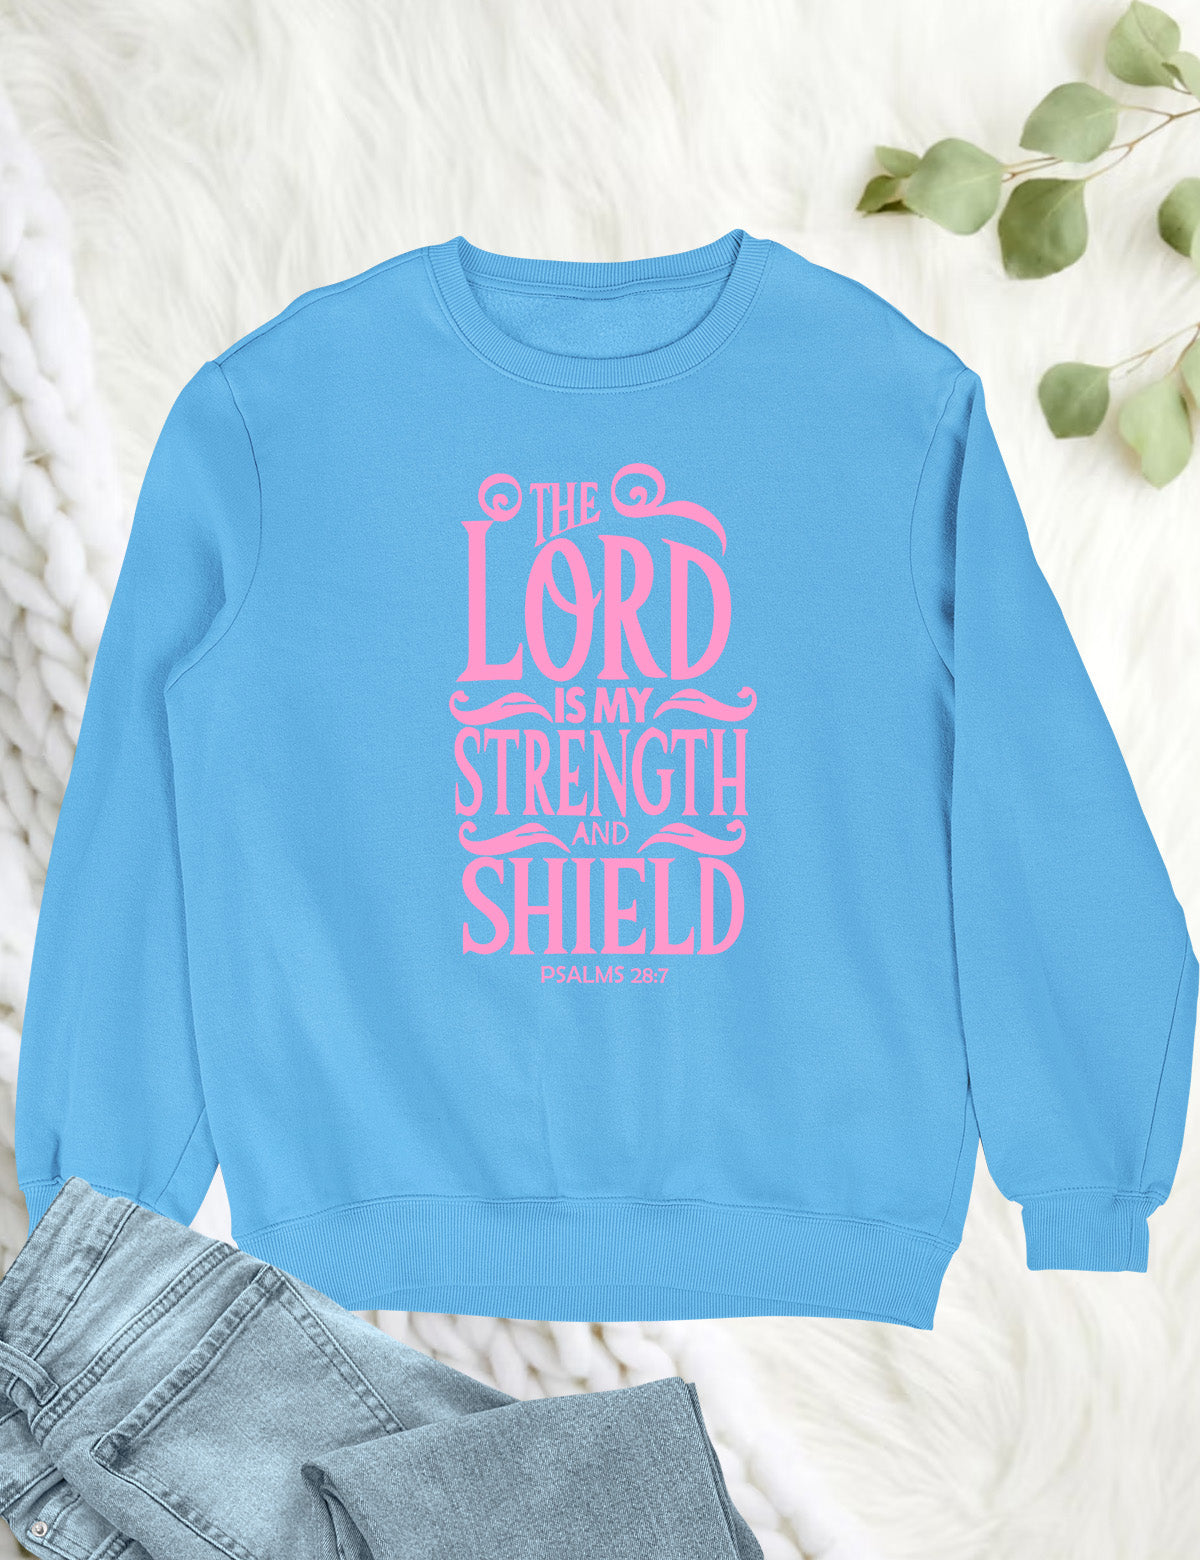 The Lord is My Strength and Shield Sweatshirt